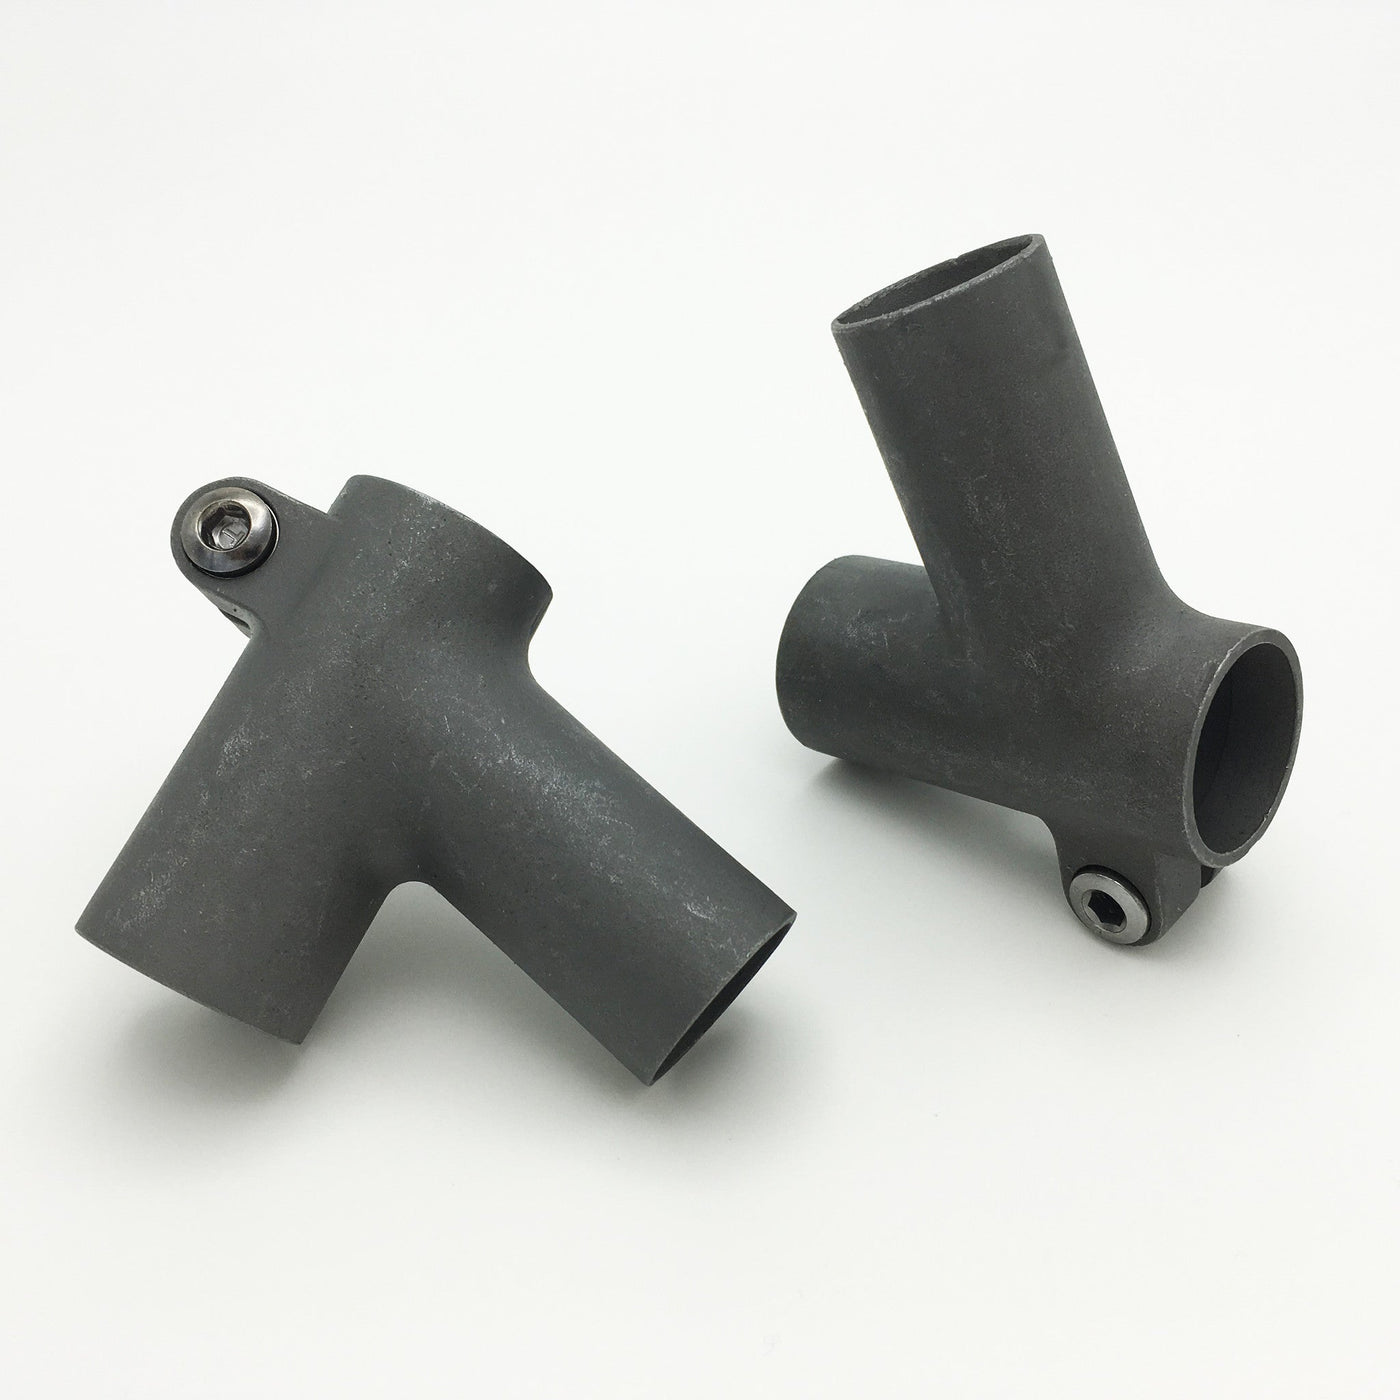 Seat lug for standard 1" frame - blank for carving - 28.6 seat tube & 25.4 top tube - 75°